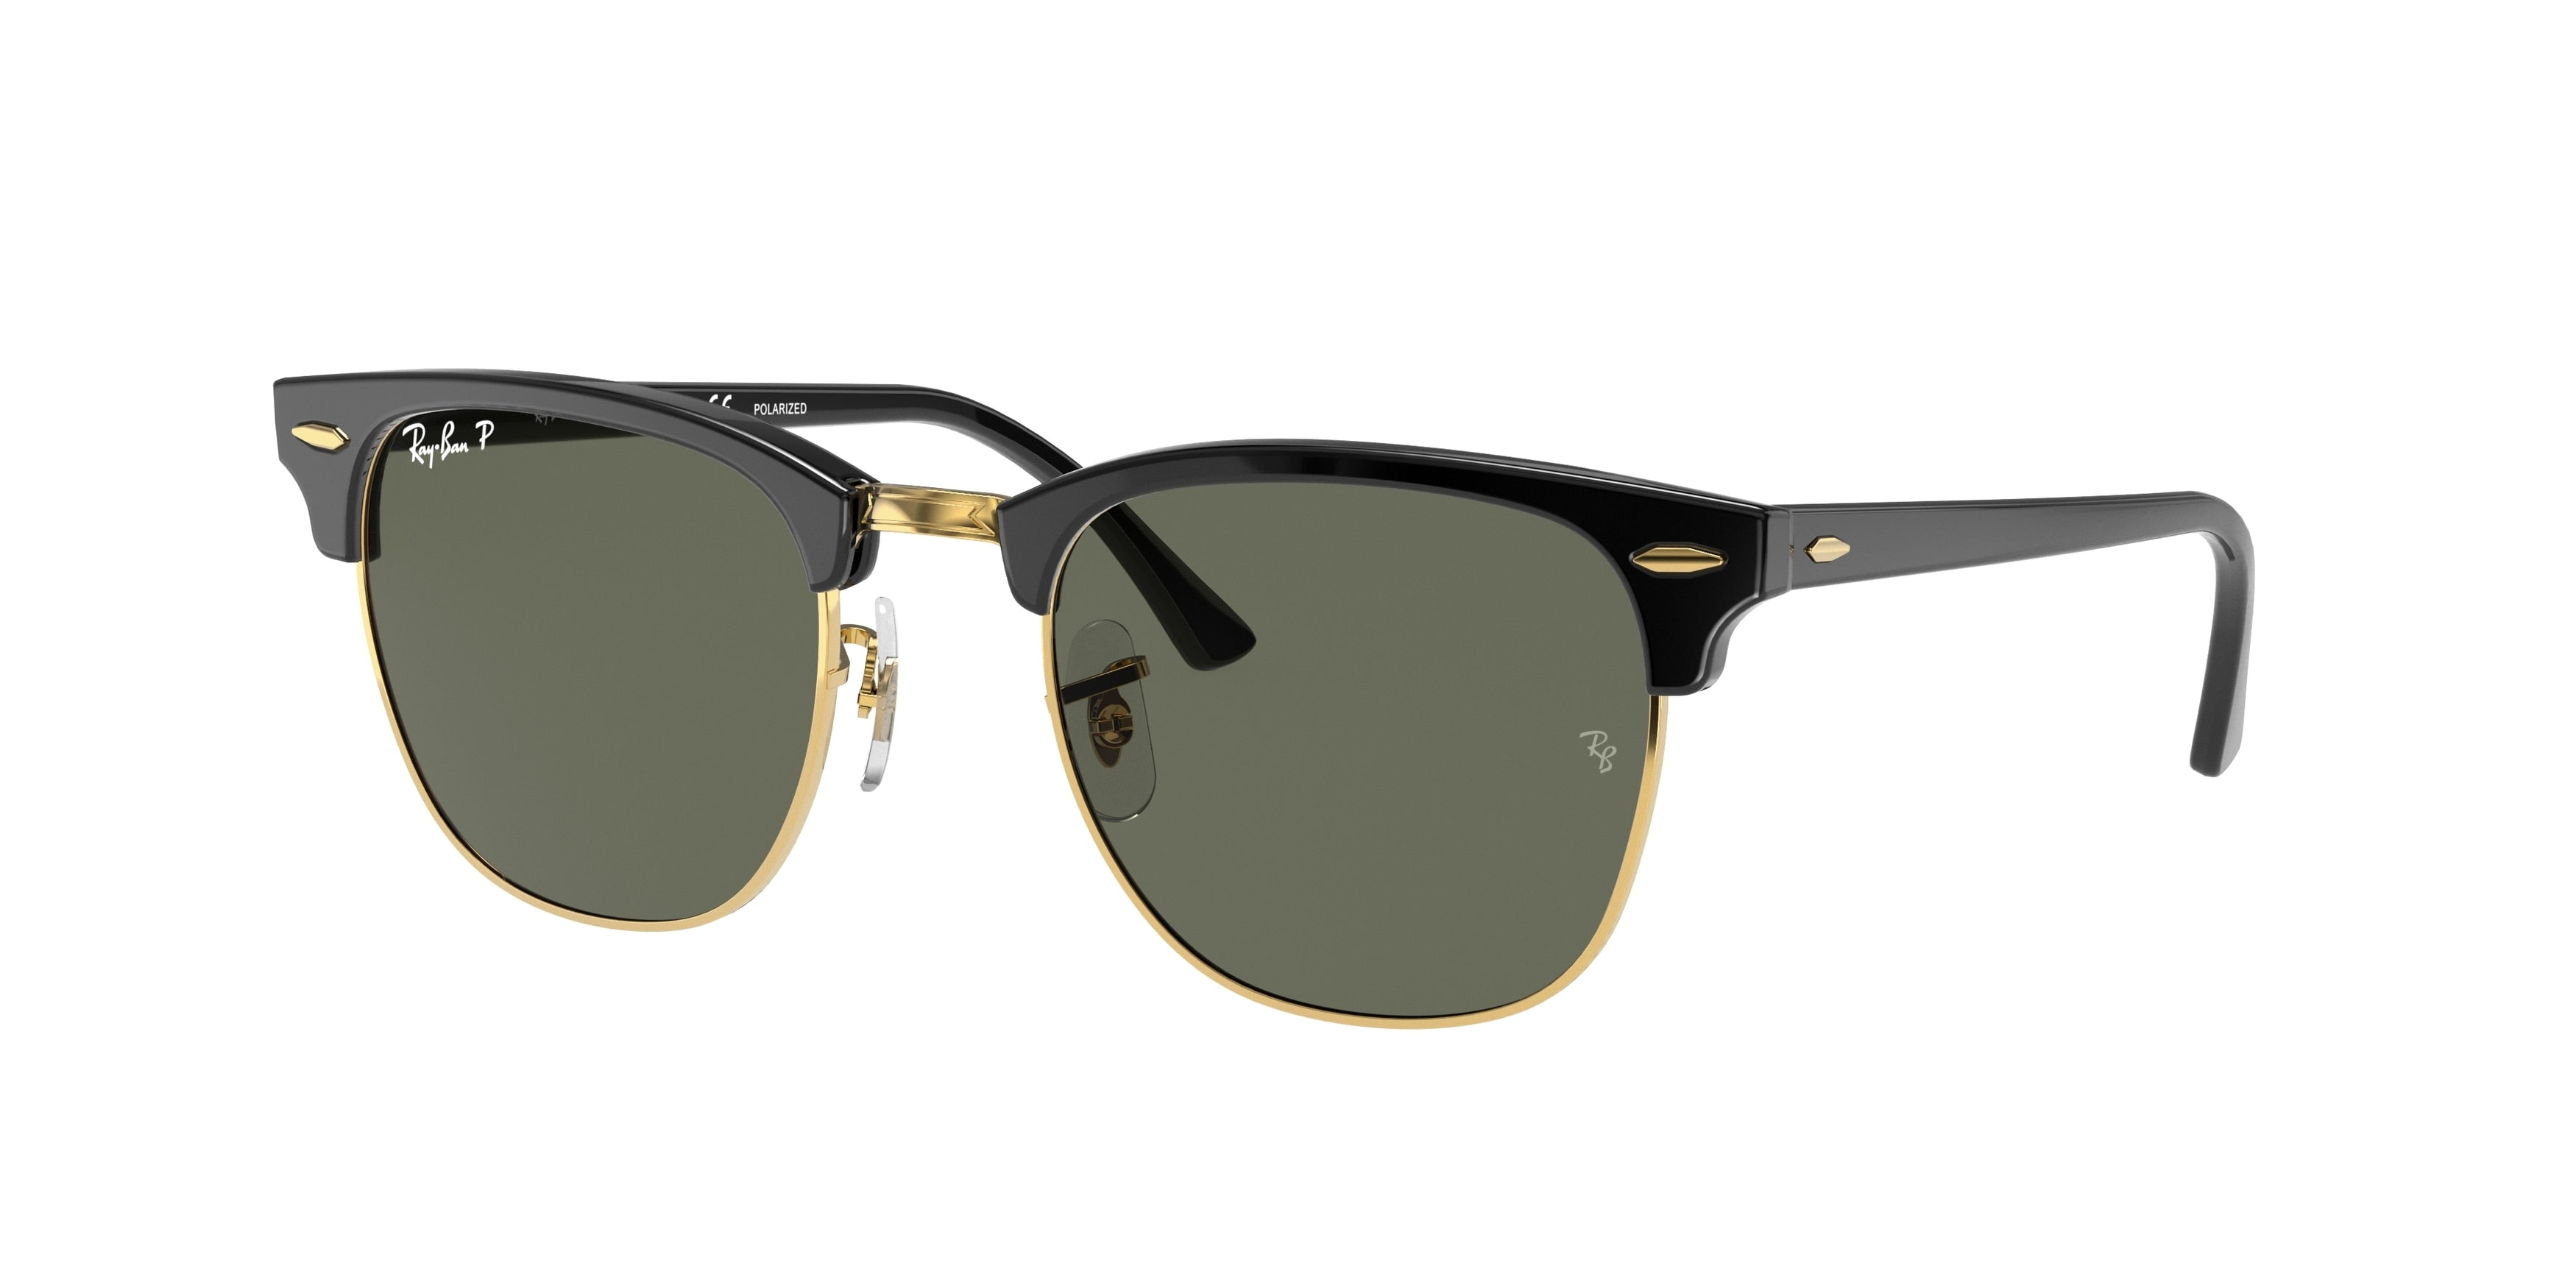 Ray-Ban CLUBMASTER RB3016 Square Sunglasses  901/58-Black 55-150-21 - Color Map Black